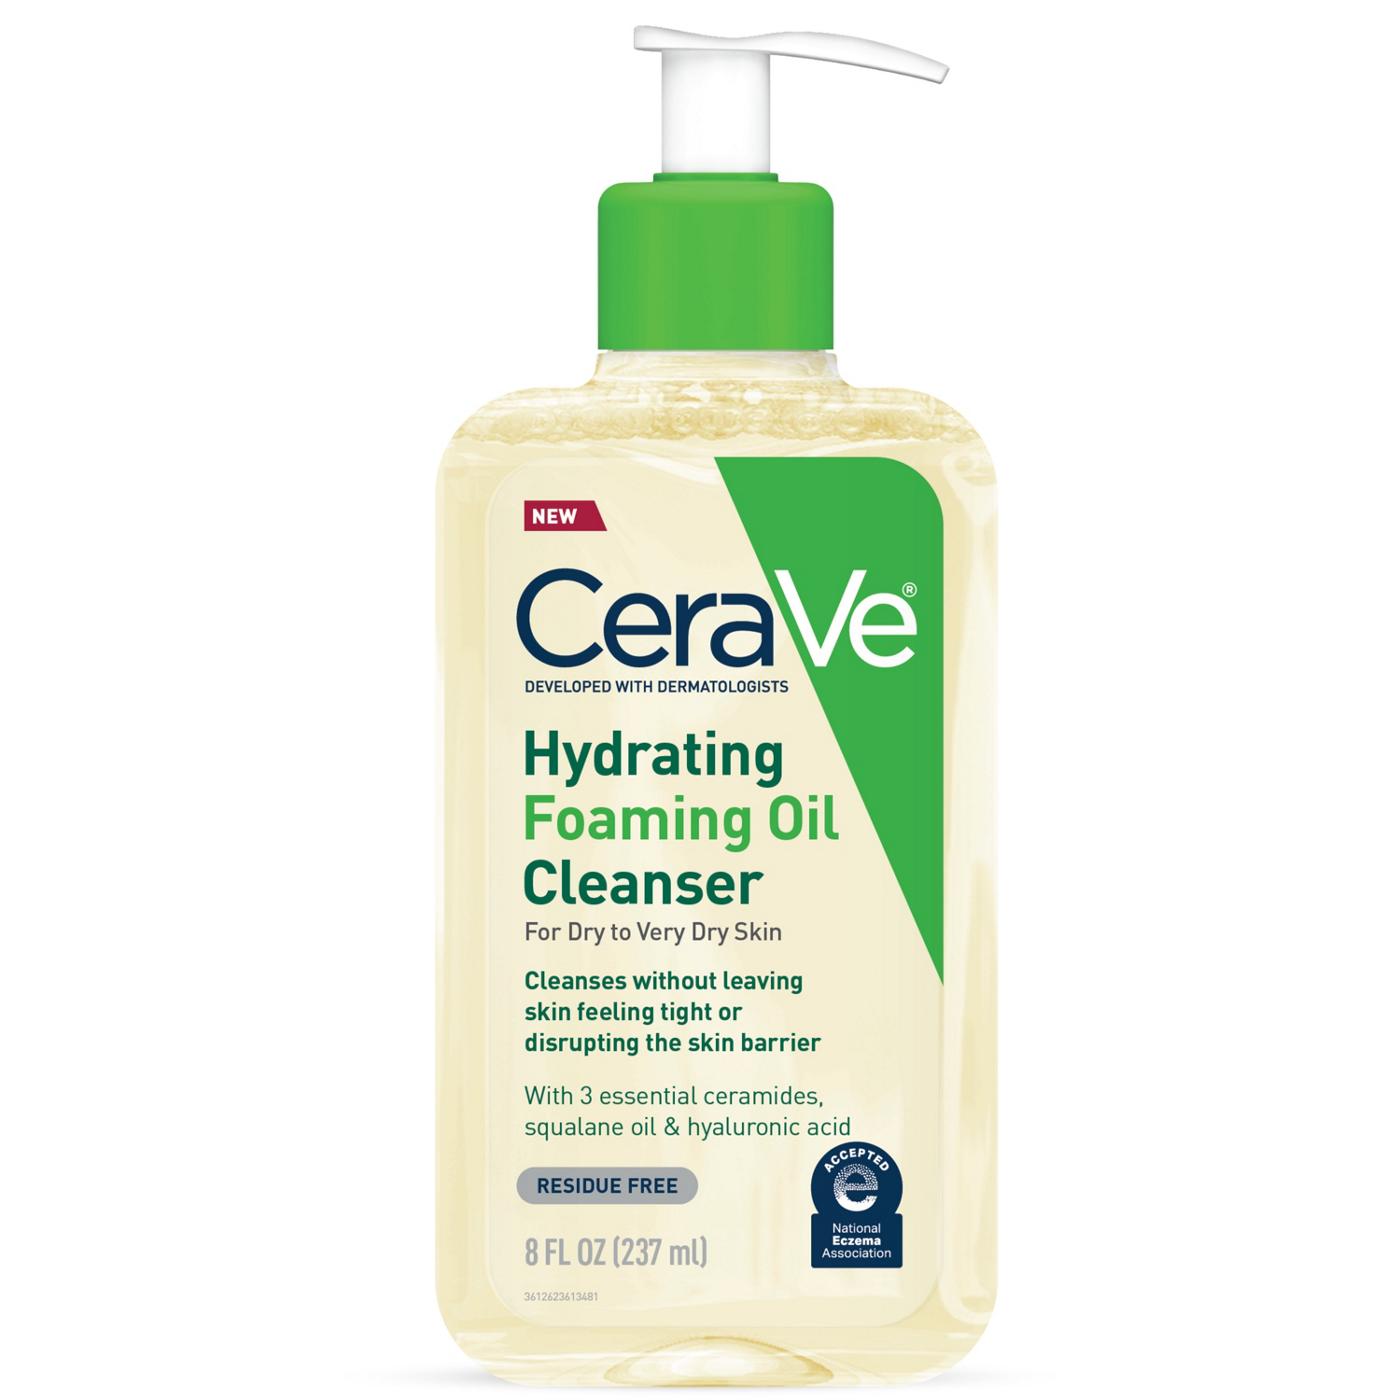 CeraVe Hydrating Foaming Oil Cleanser; image 1 of 2